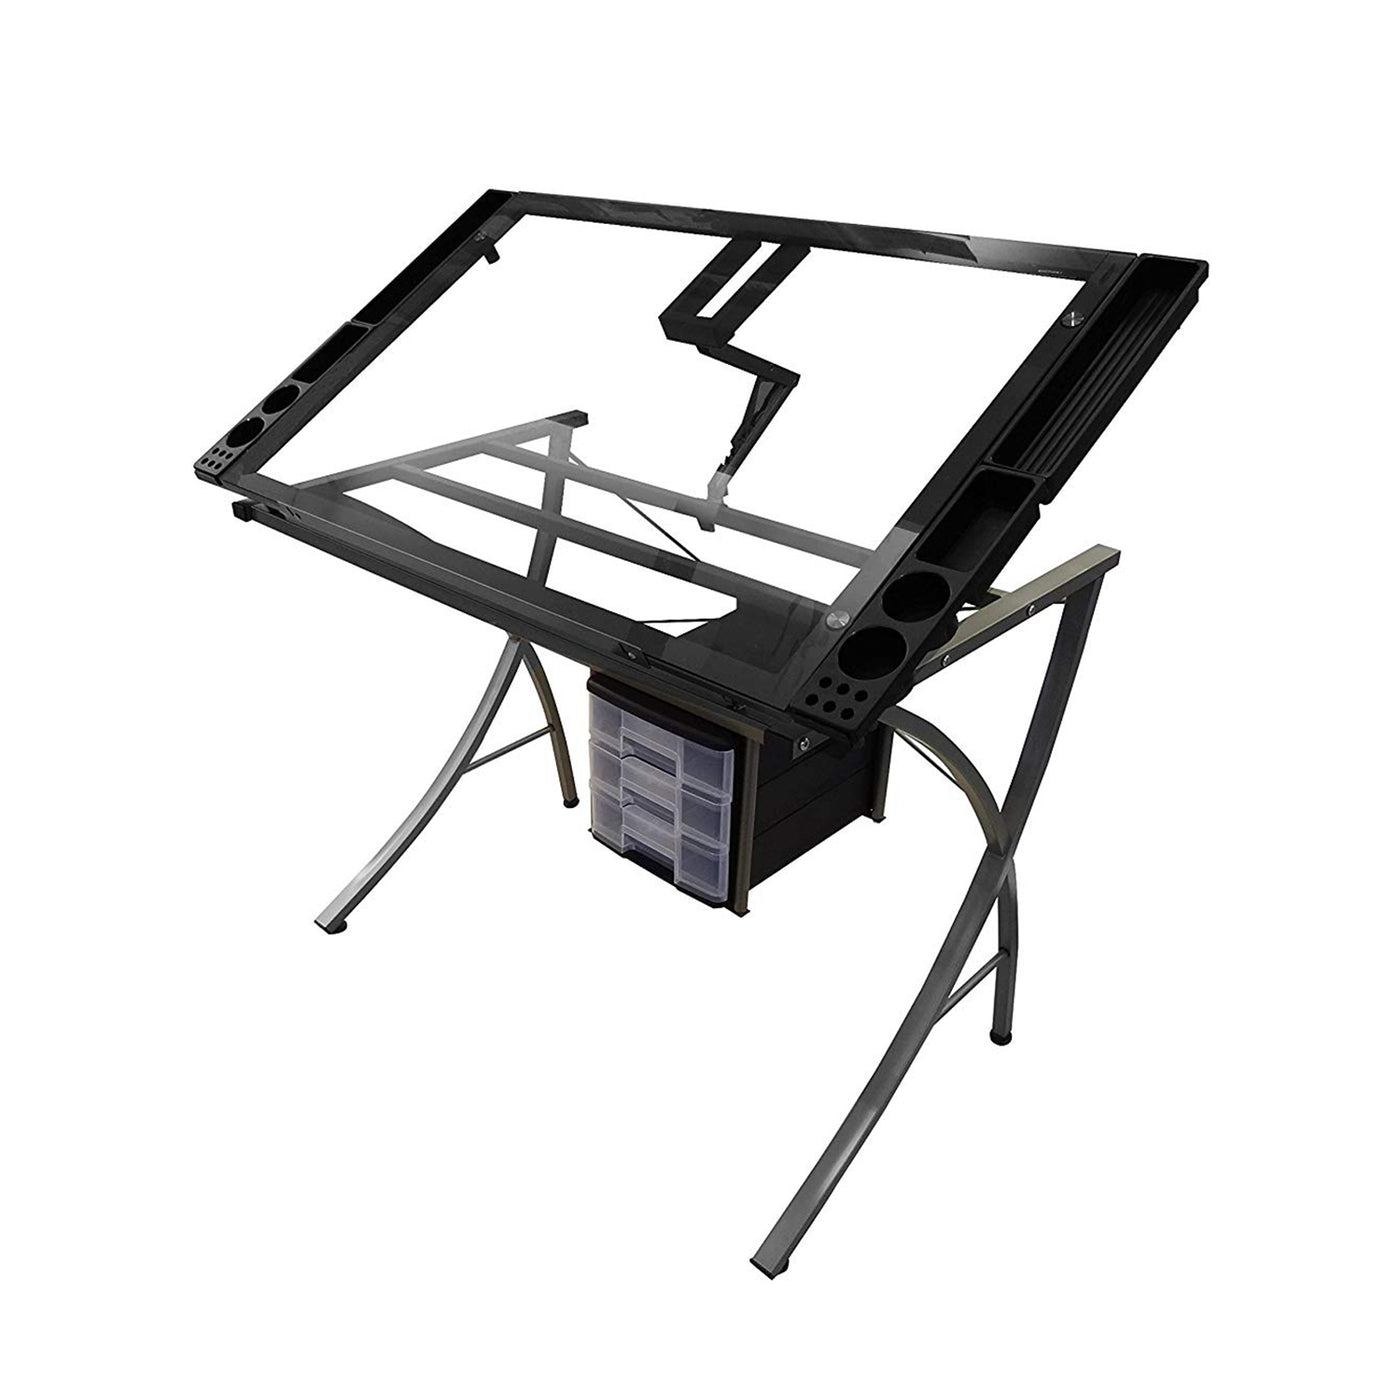 Office Drafting Table Art Drawing Adjustable Craft Work Station